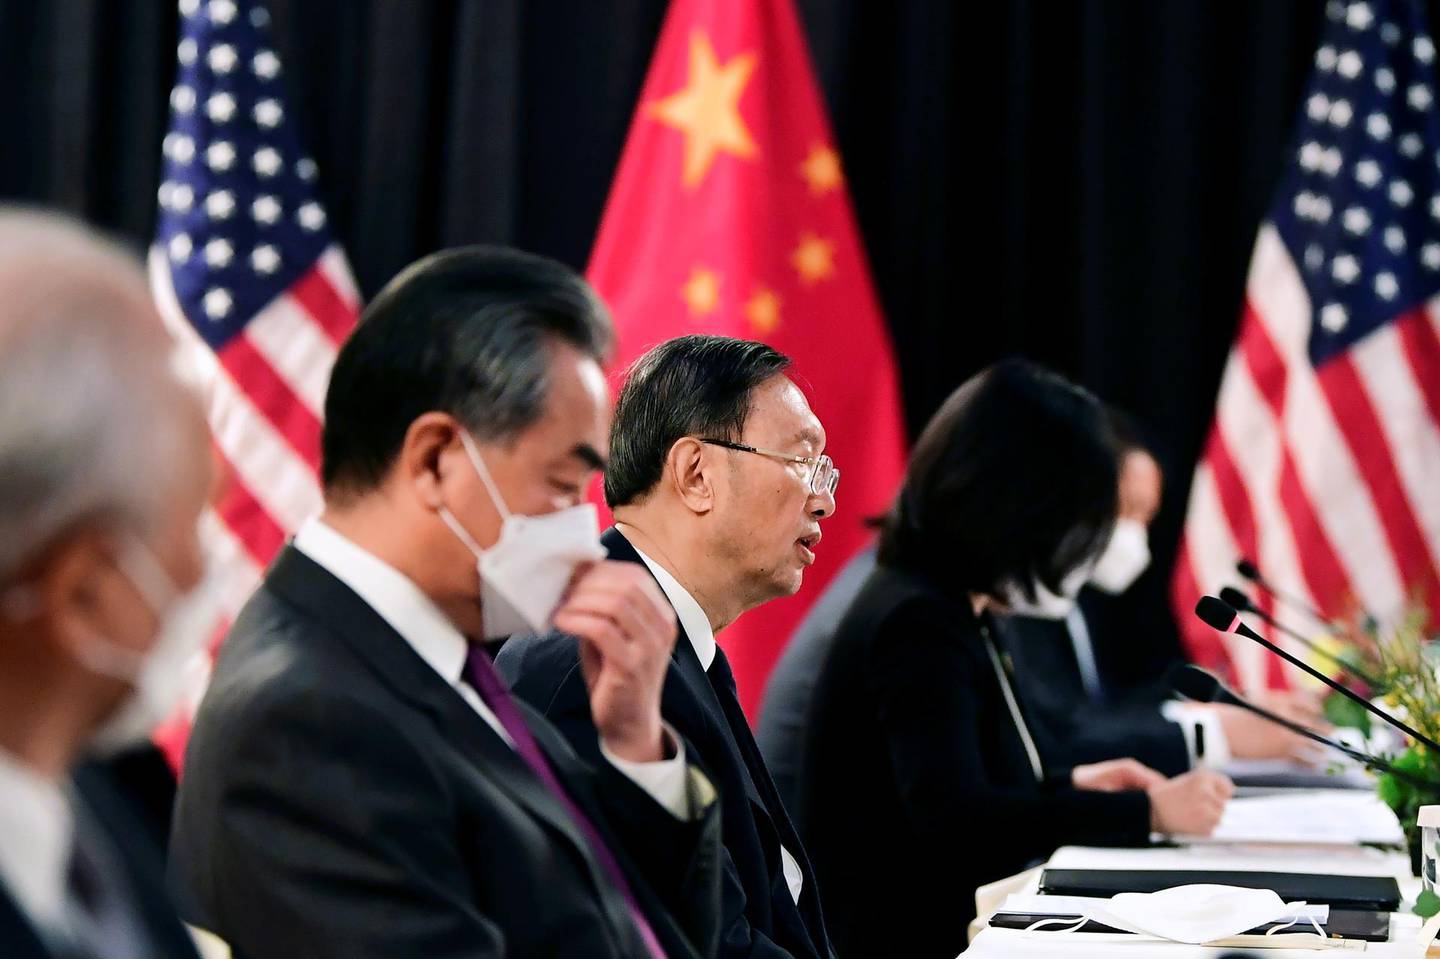 The Chinese delegation led by Yang Jiechi (C), director of the Central Foreign Affairs Commission Office and Wang Yi (2nd L), China's State Councilor and Foreign Minister, speak with their U.S. counterparts at the opening session of U.S.-China talks at the Captain Cook Hotel in Anchorage, Alaska, U.S. March 18, 2021.  Frederic J. Brown/Pool via REUTERS